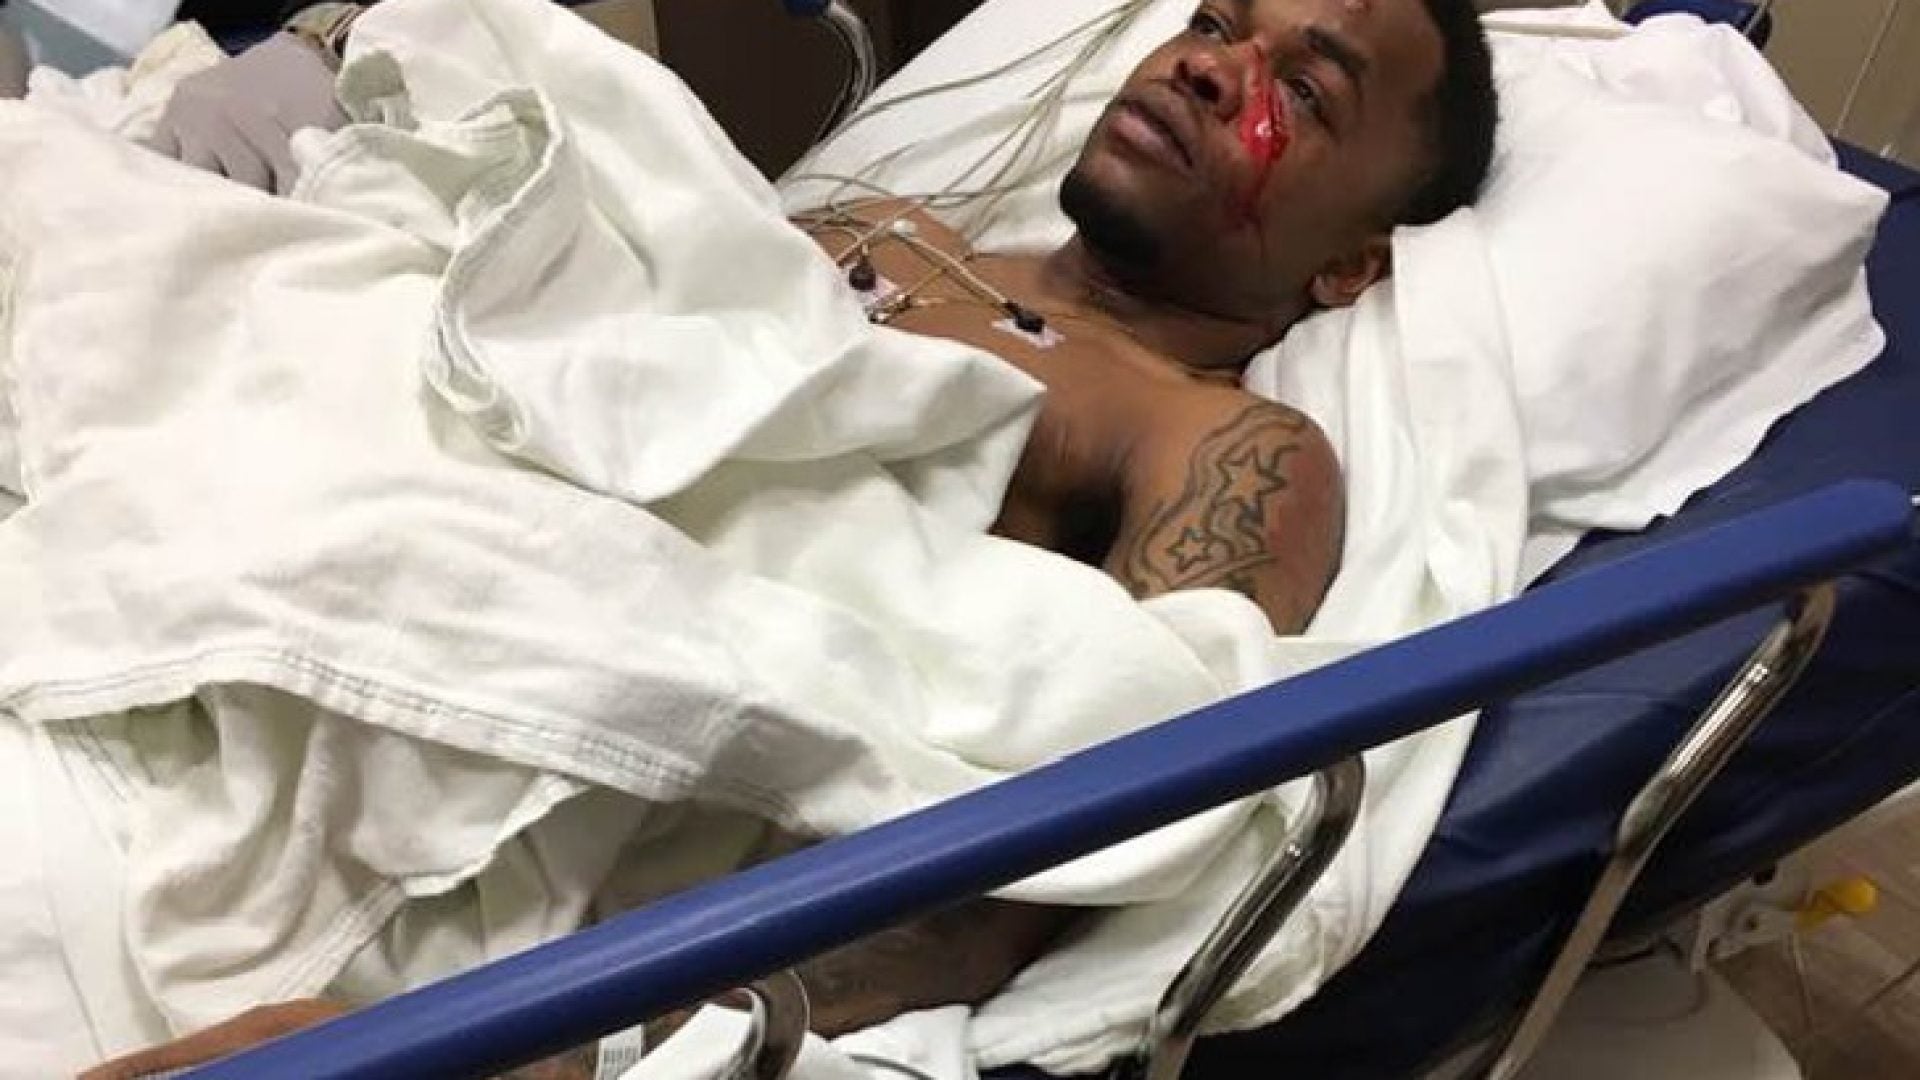 Police Investigating After 22-Year-Old Says White Men Broke Face In 5 Places